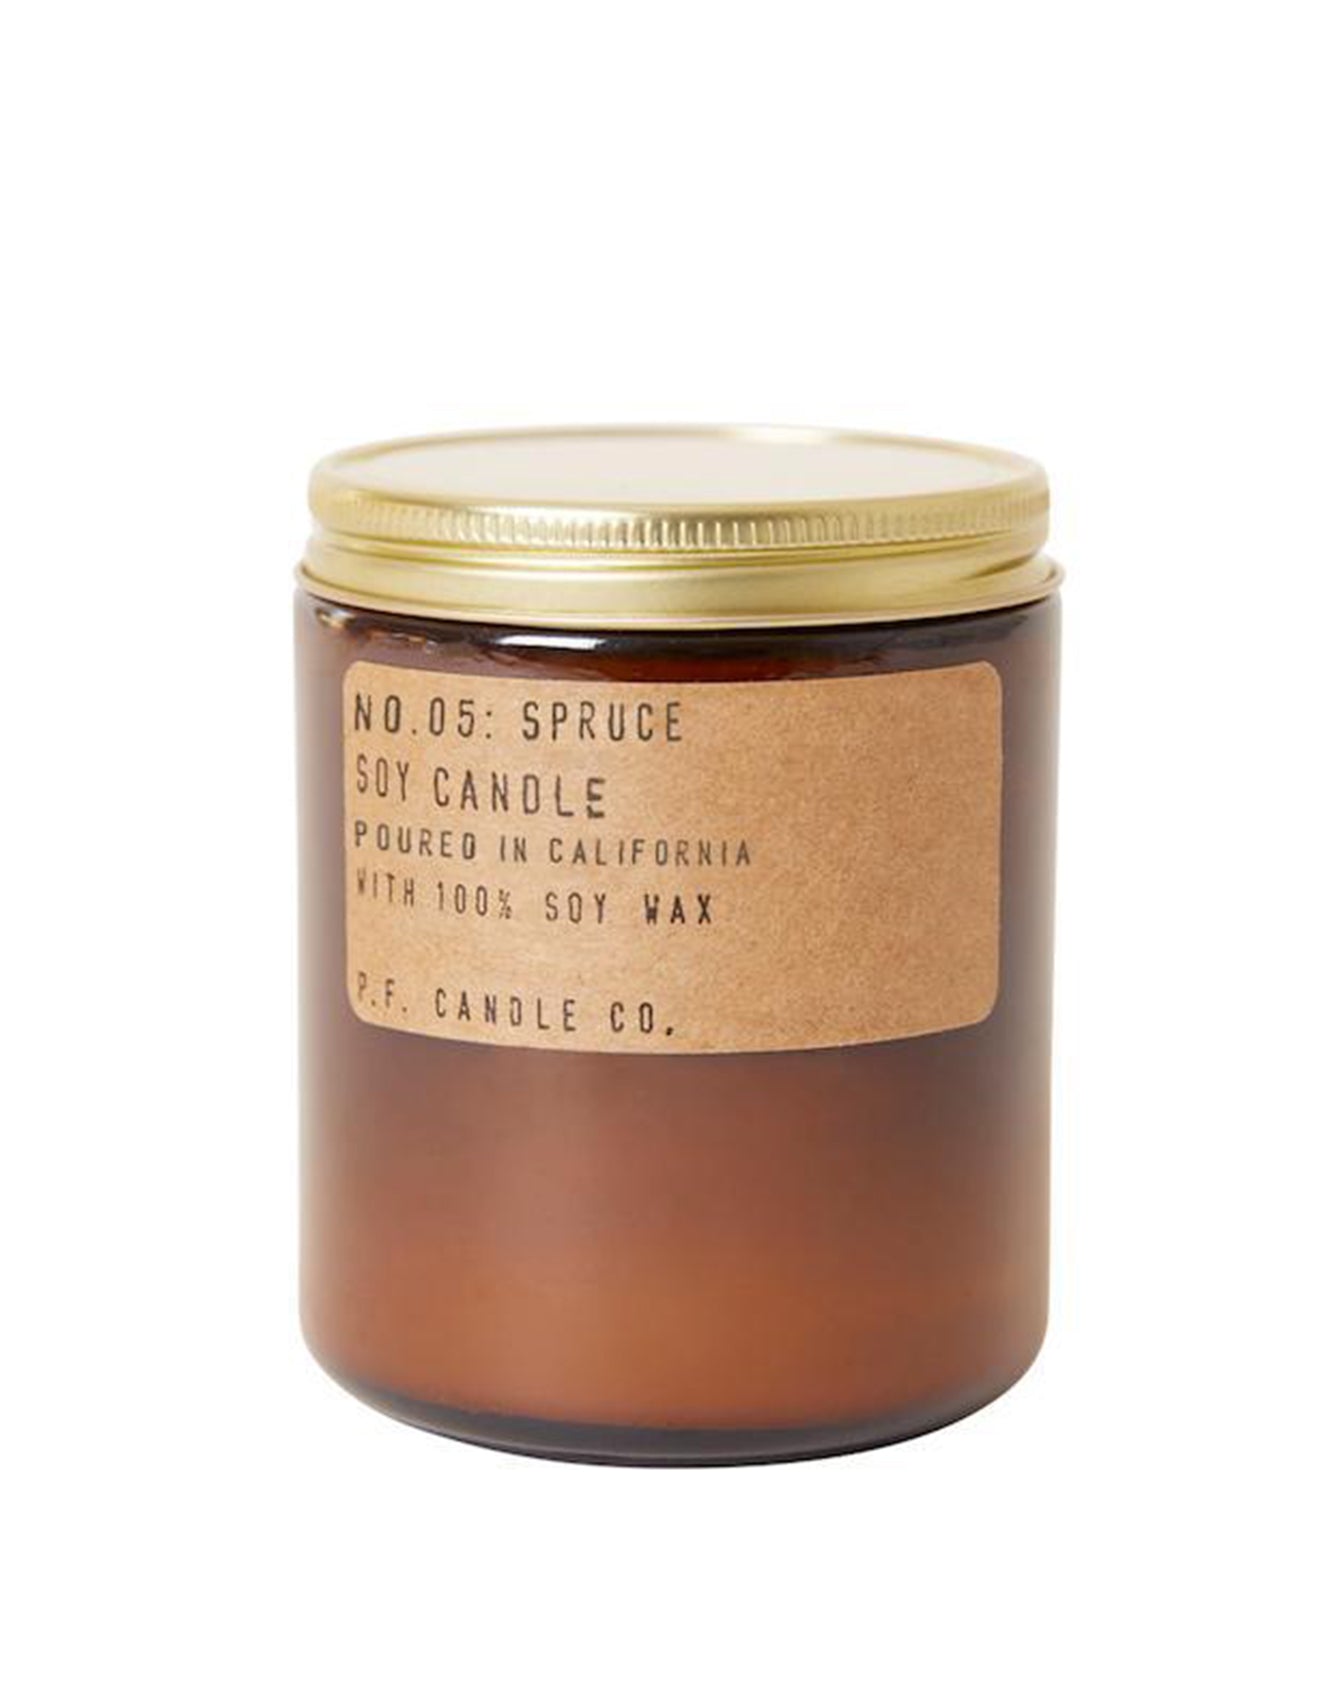 P.F. Candle Co. Spruce– 7.2 oz Soy Candle